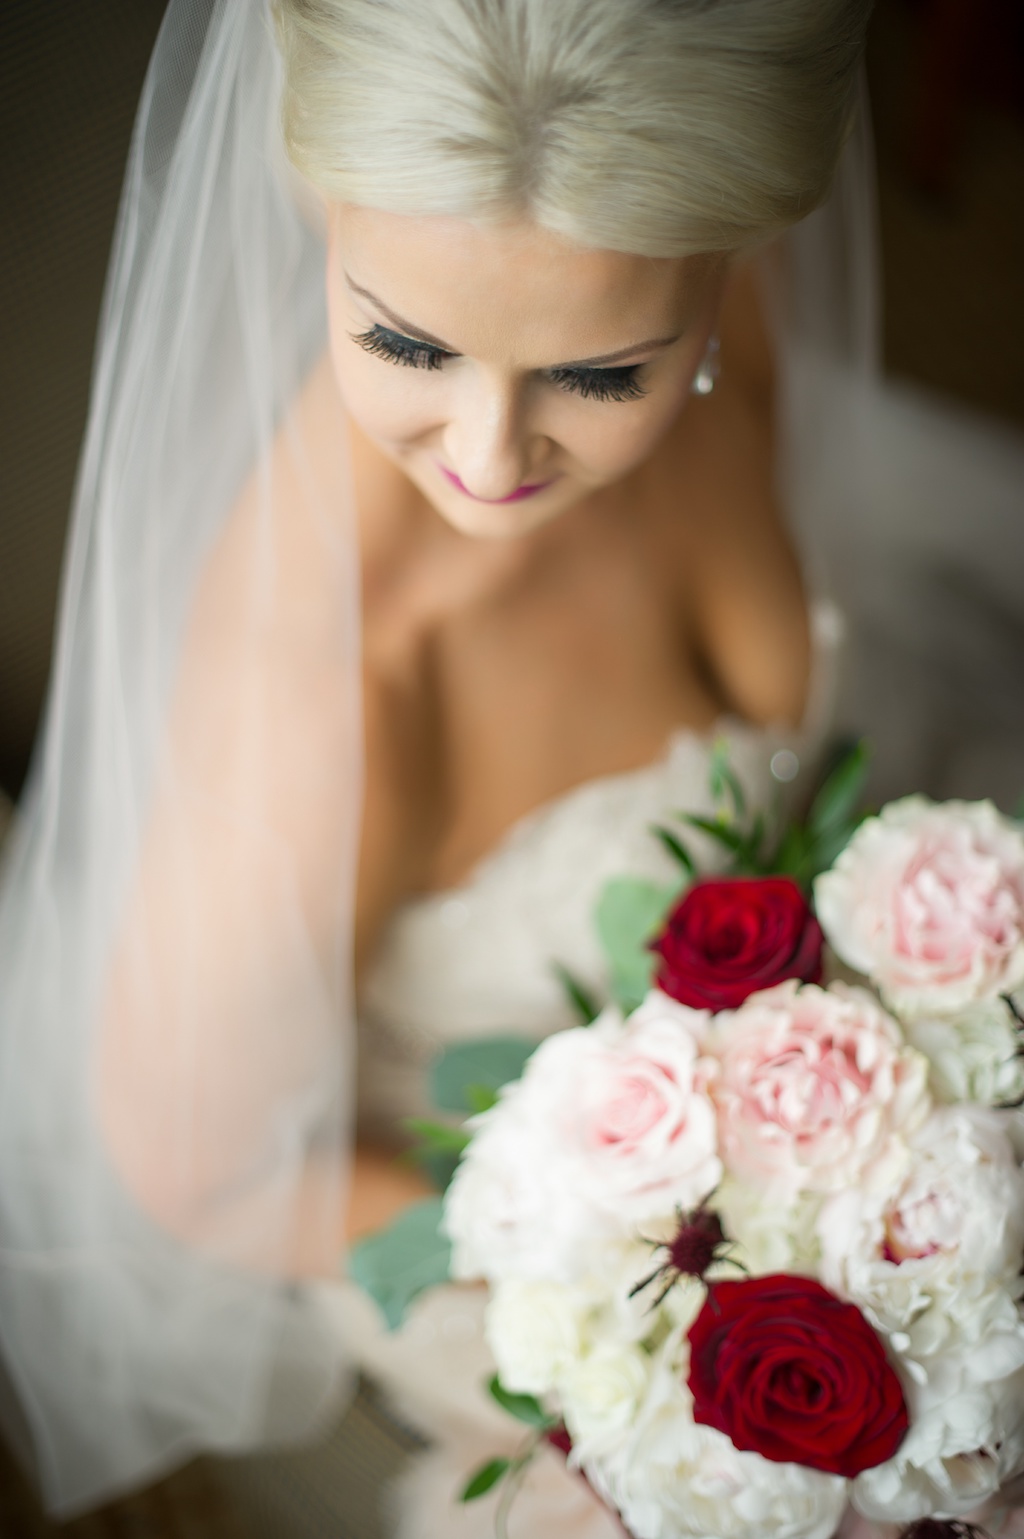 Bridal Portrait with Red Rose, Blush Pink Carnation and Greenery and Burgundy Thistle Bouquet | Tampa Bay Wedding Photography Andi Diamond Photography | Hair and Makeup Michele Renee The Studio